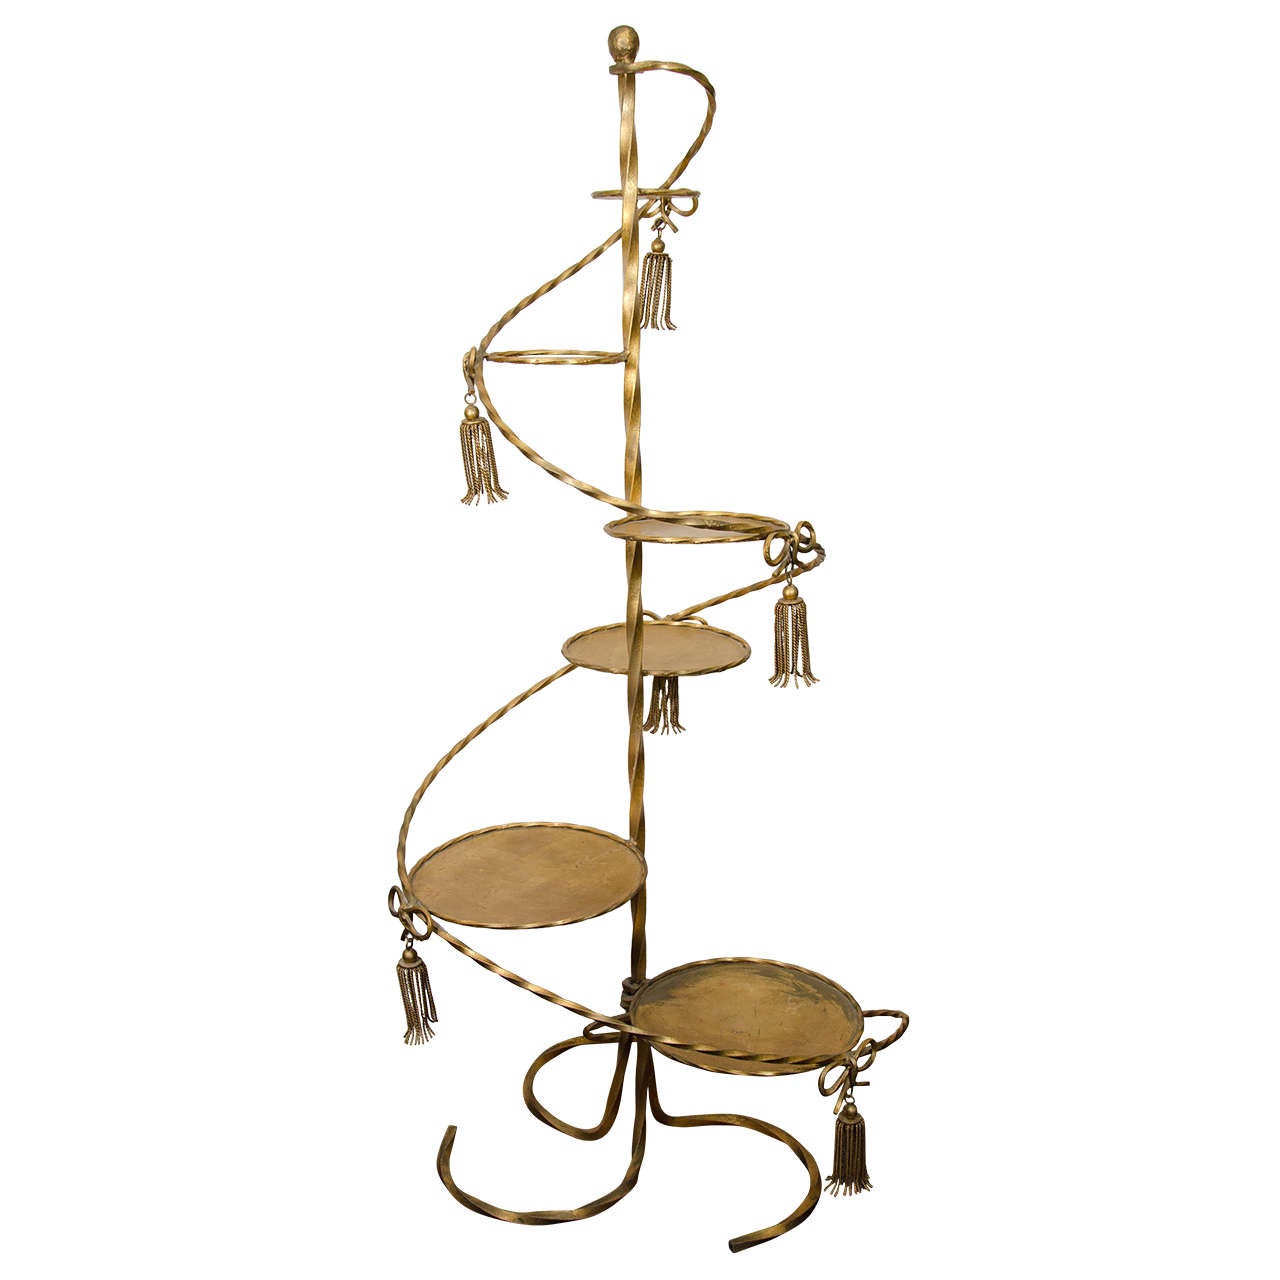 A Midcentury Spiral Plant Stand with Round Graduating Platforms